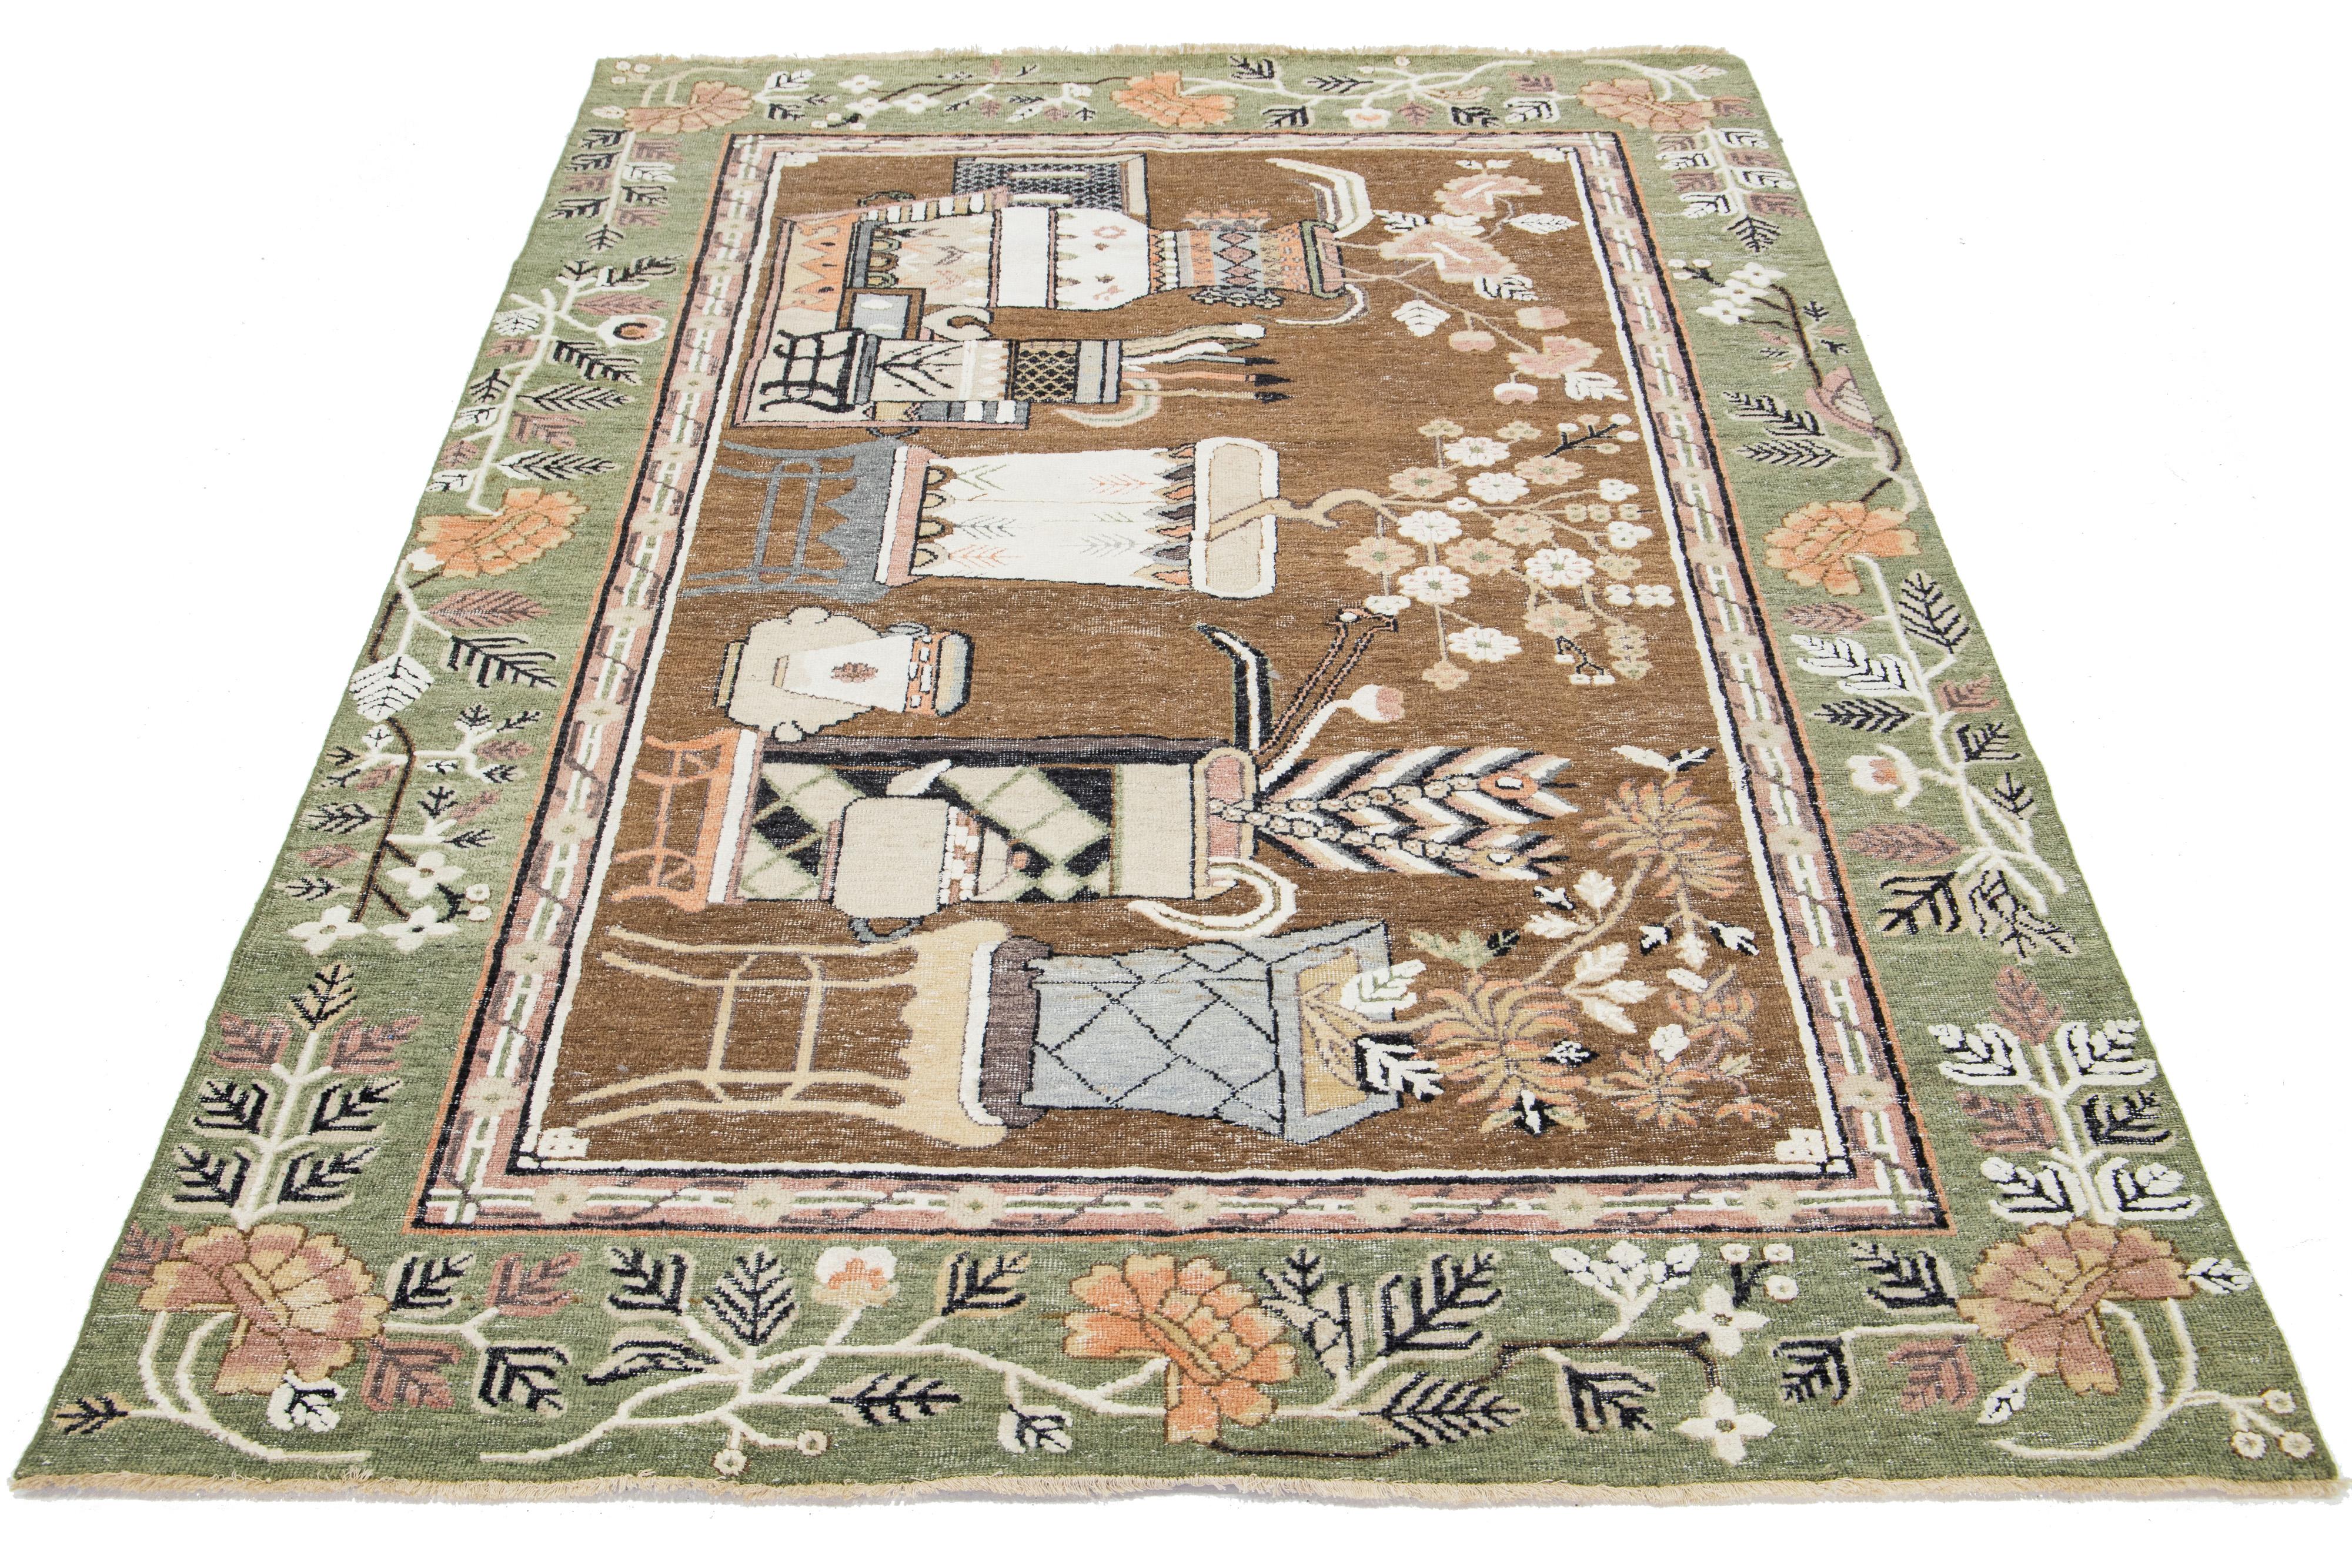 This beautiful modern Samarkand hand-knotted wool rug features a brown field and a green frame. The rug showcases orange, gray, and rose accents throughout the pictorial motif design.

This rug measures 6'1